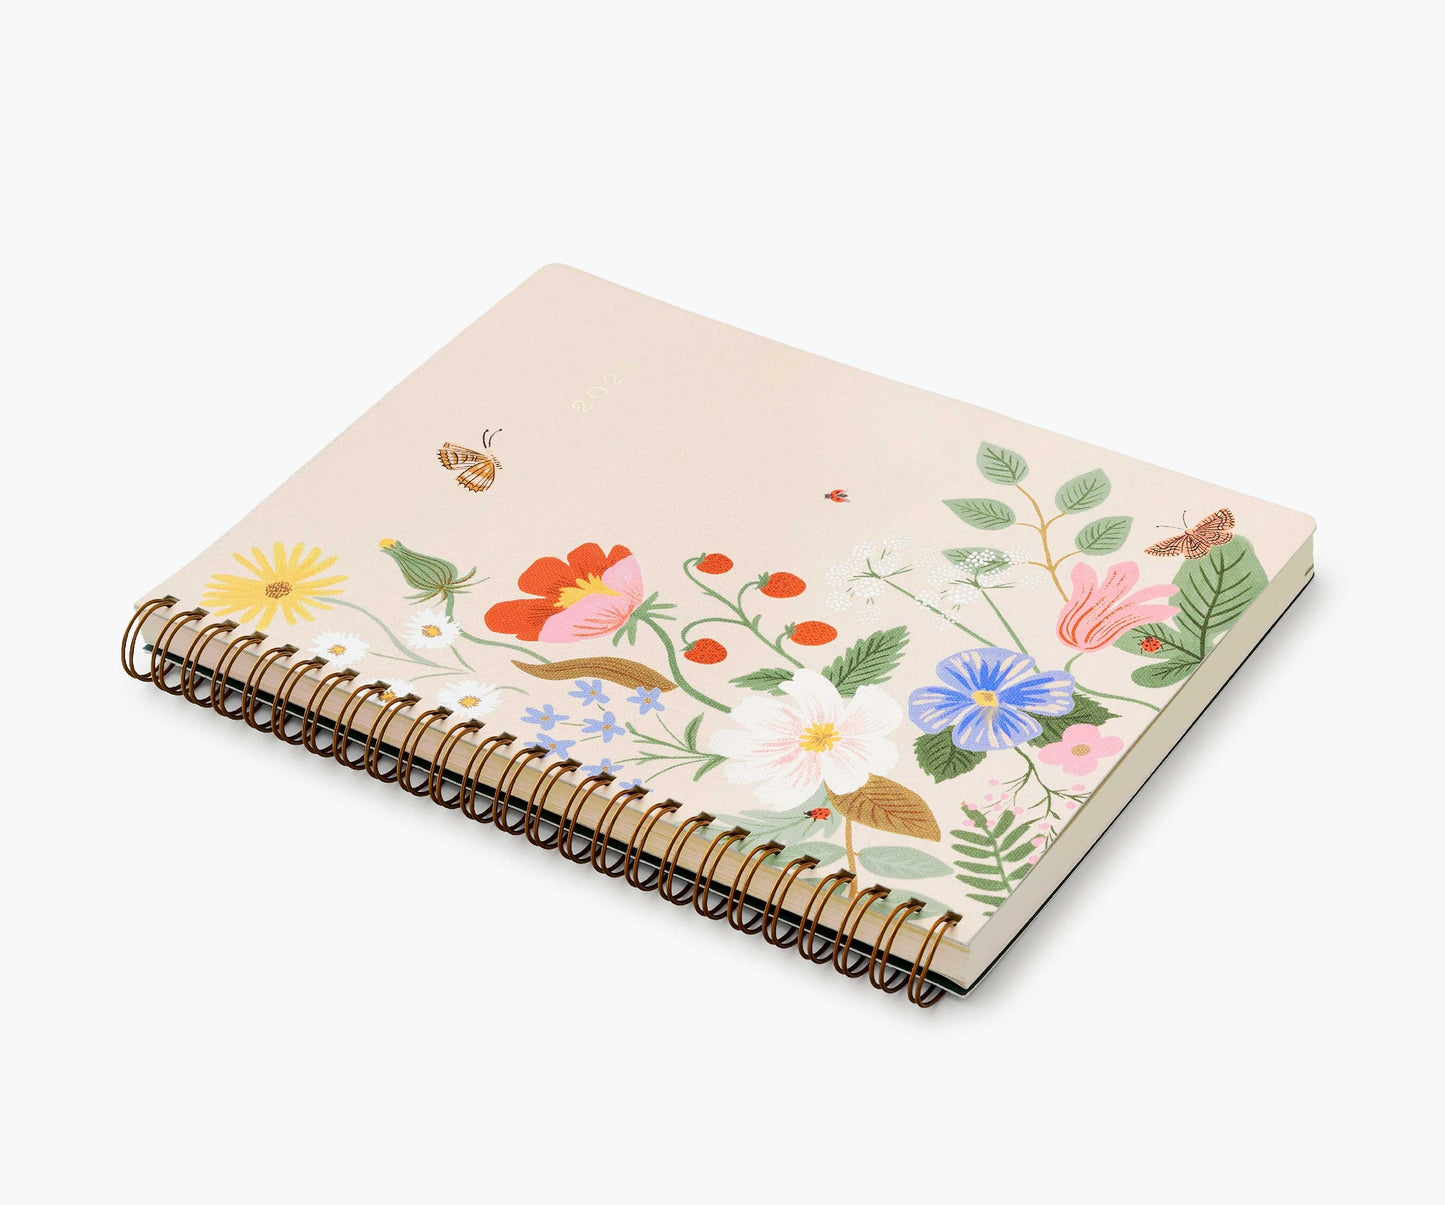 12-Month Softcover Spiral Planner 2021 - Strawberry Fields